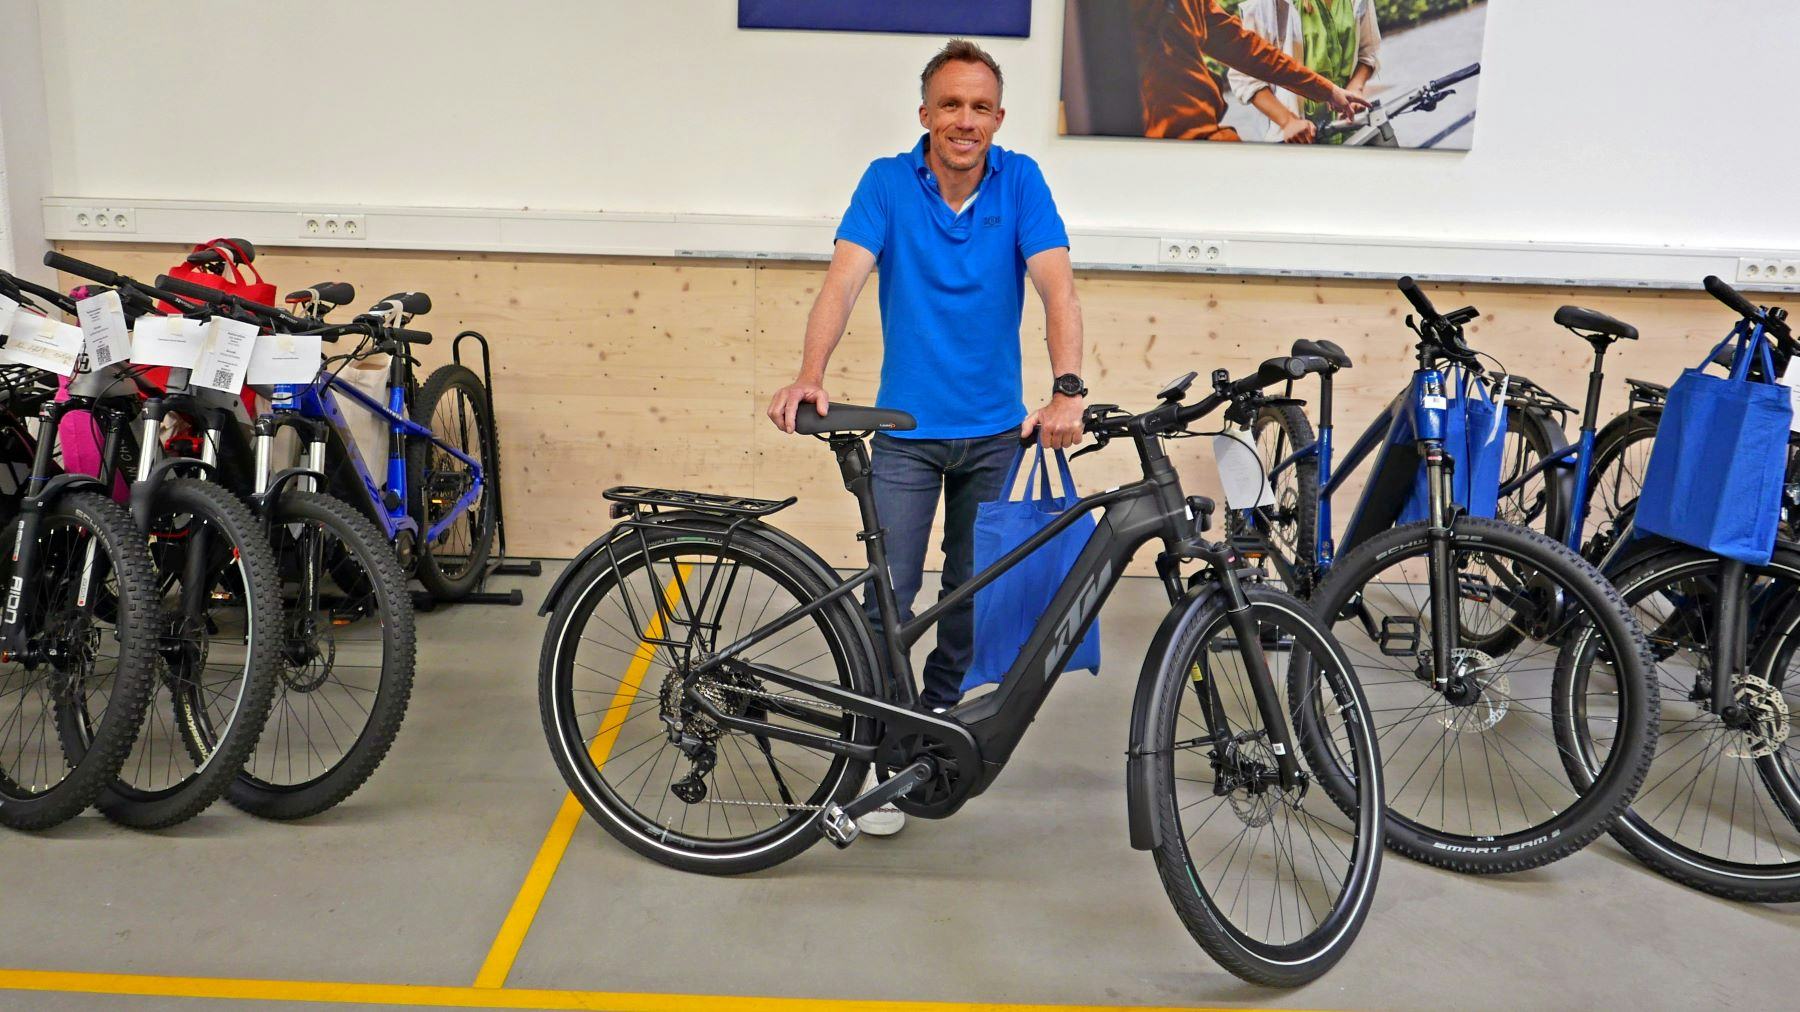 “In terms of digitization and automation we are way ahead in the bike industry right now," says Rebike co-founder and COO Sven Erger.